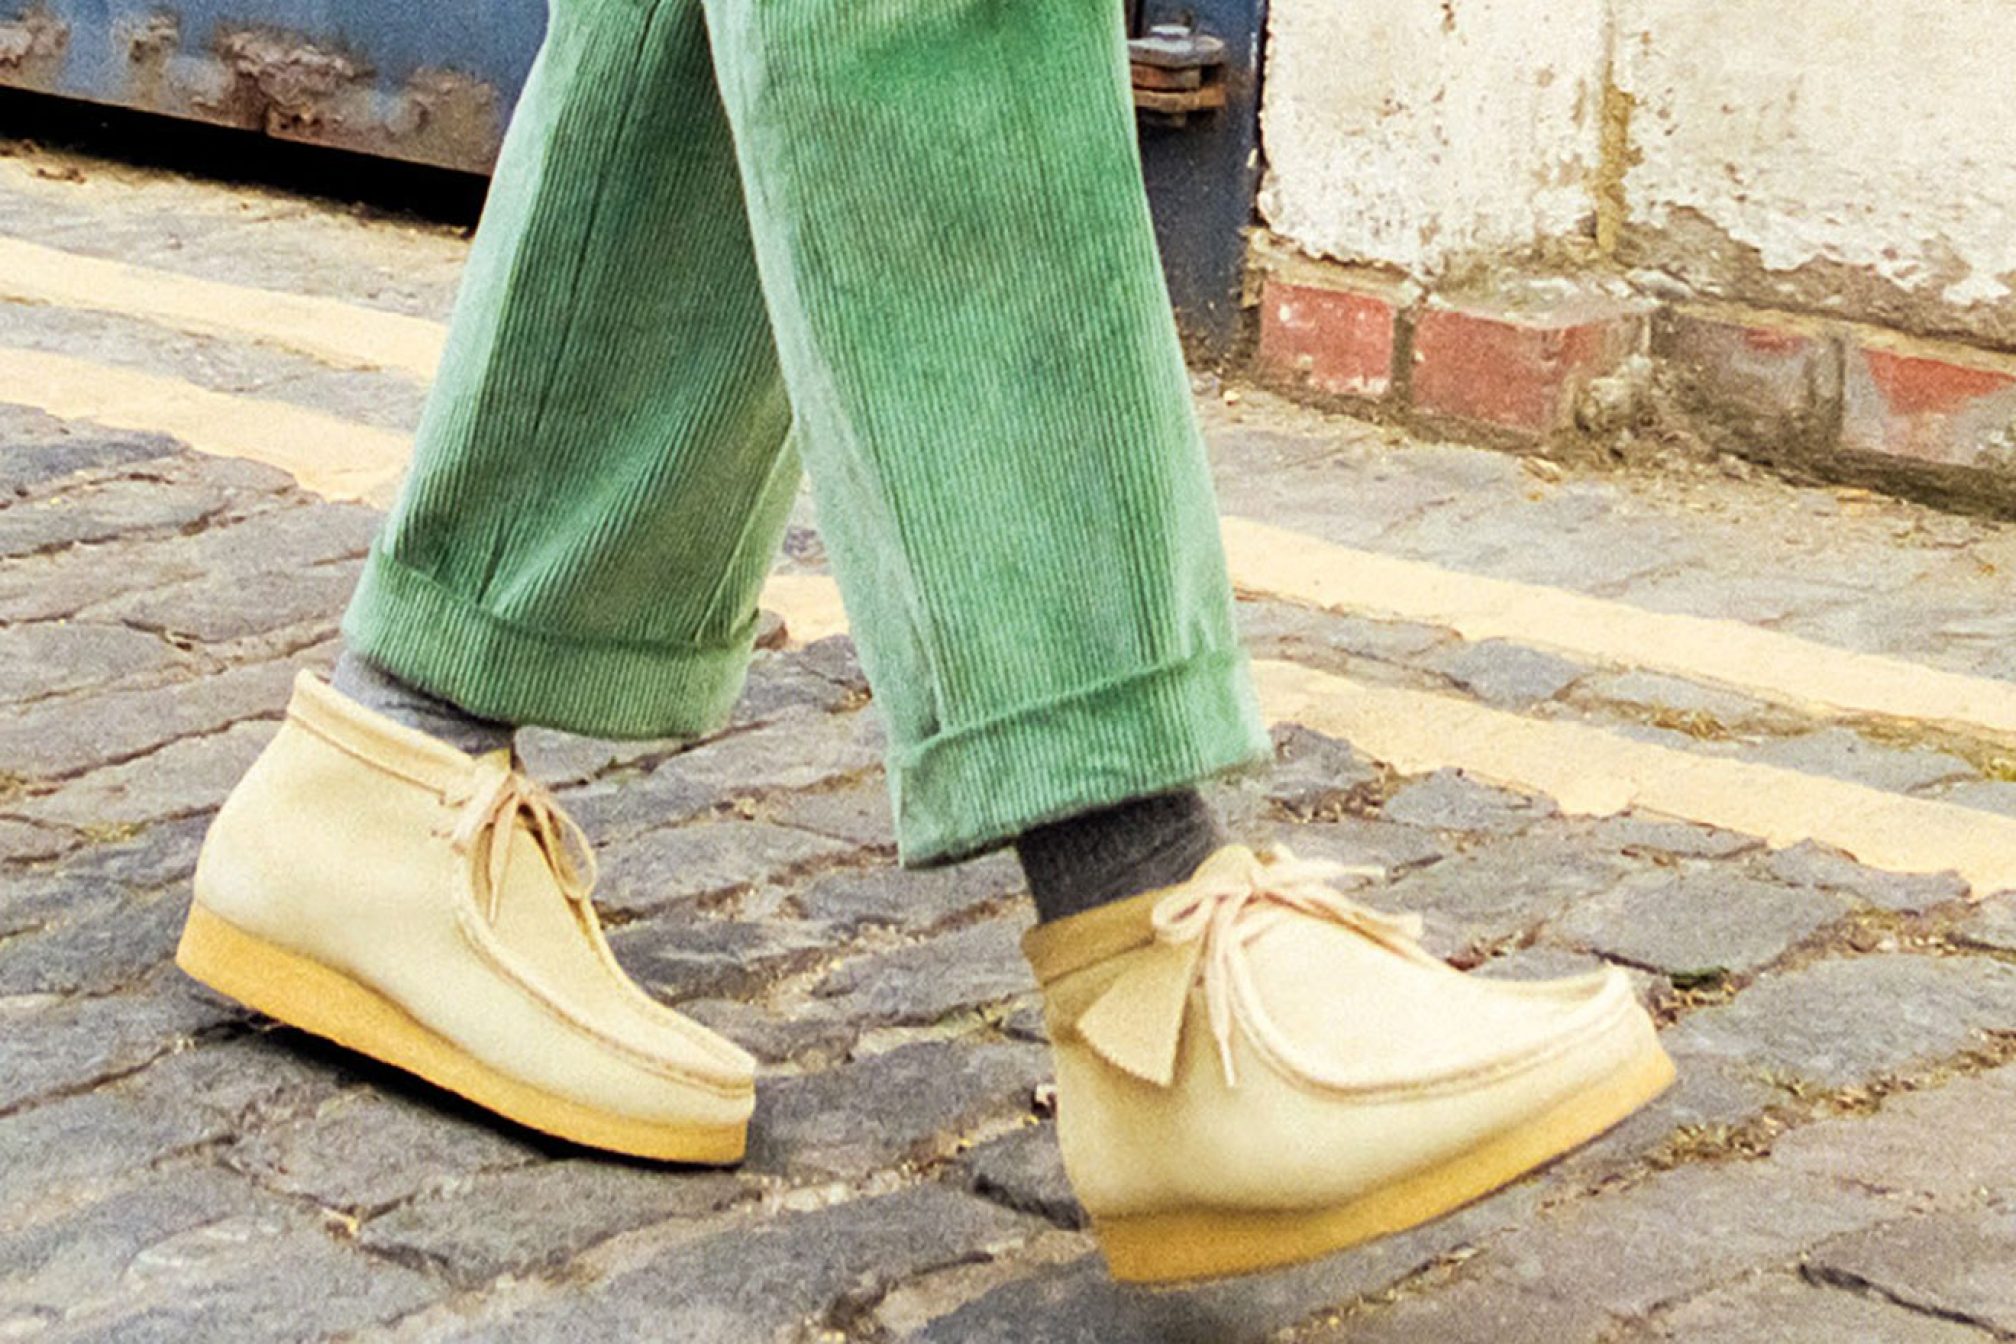 The history of the Clarks Wallabee Mixmag